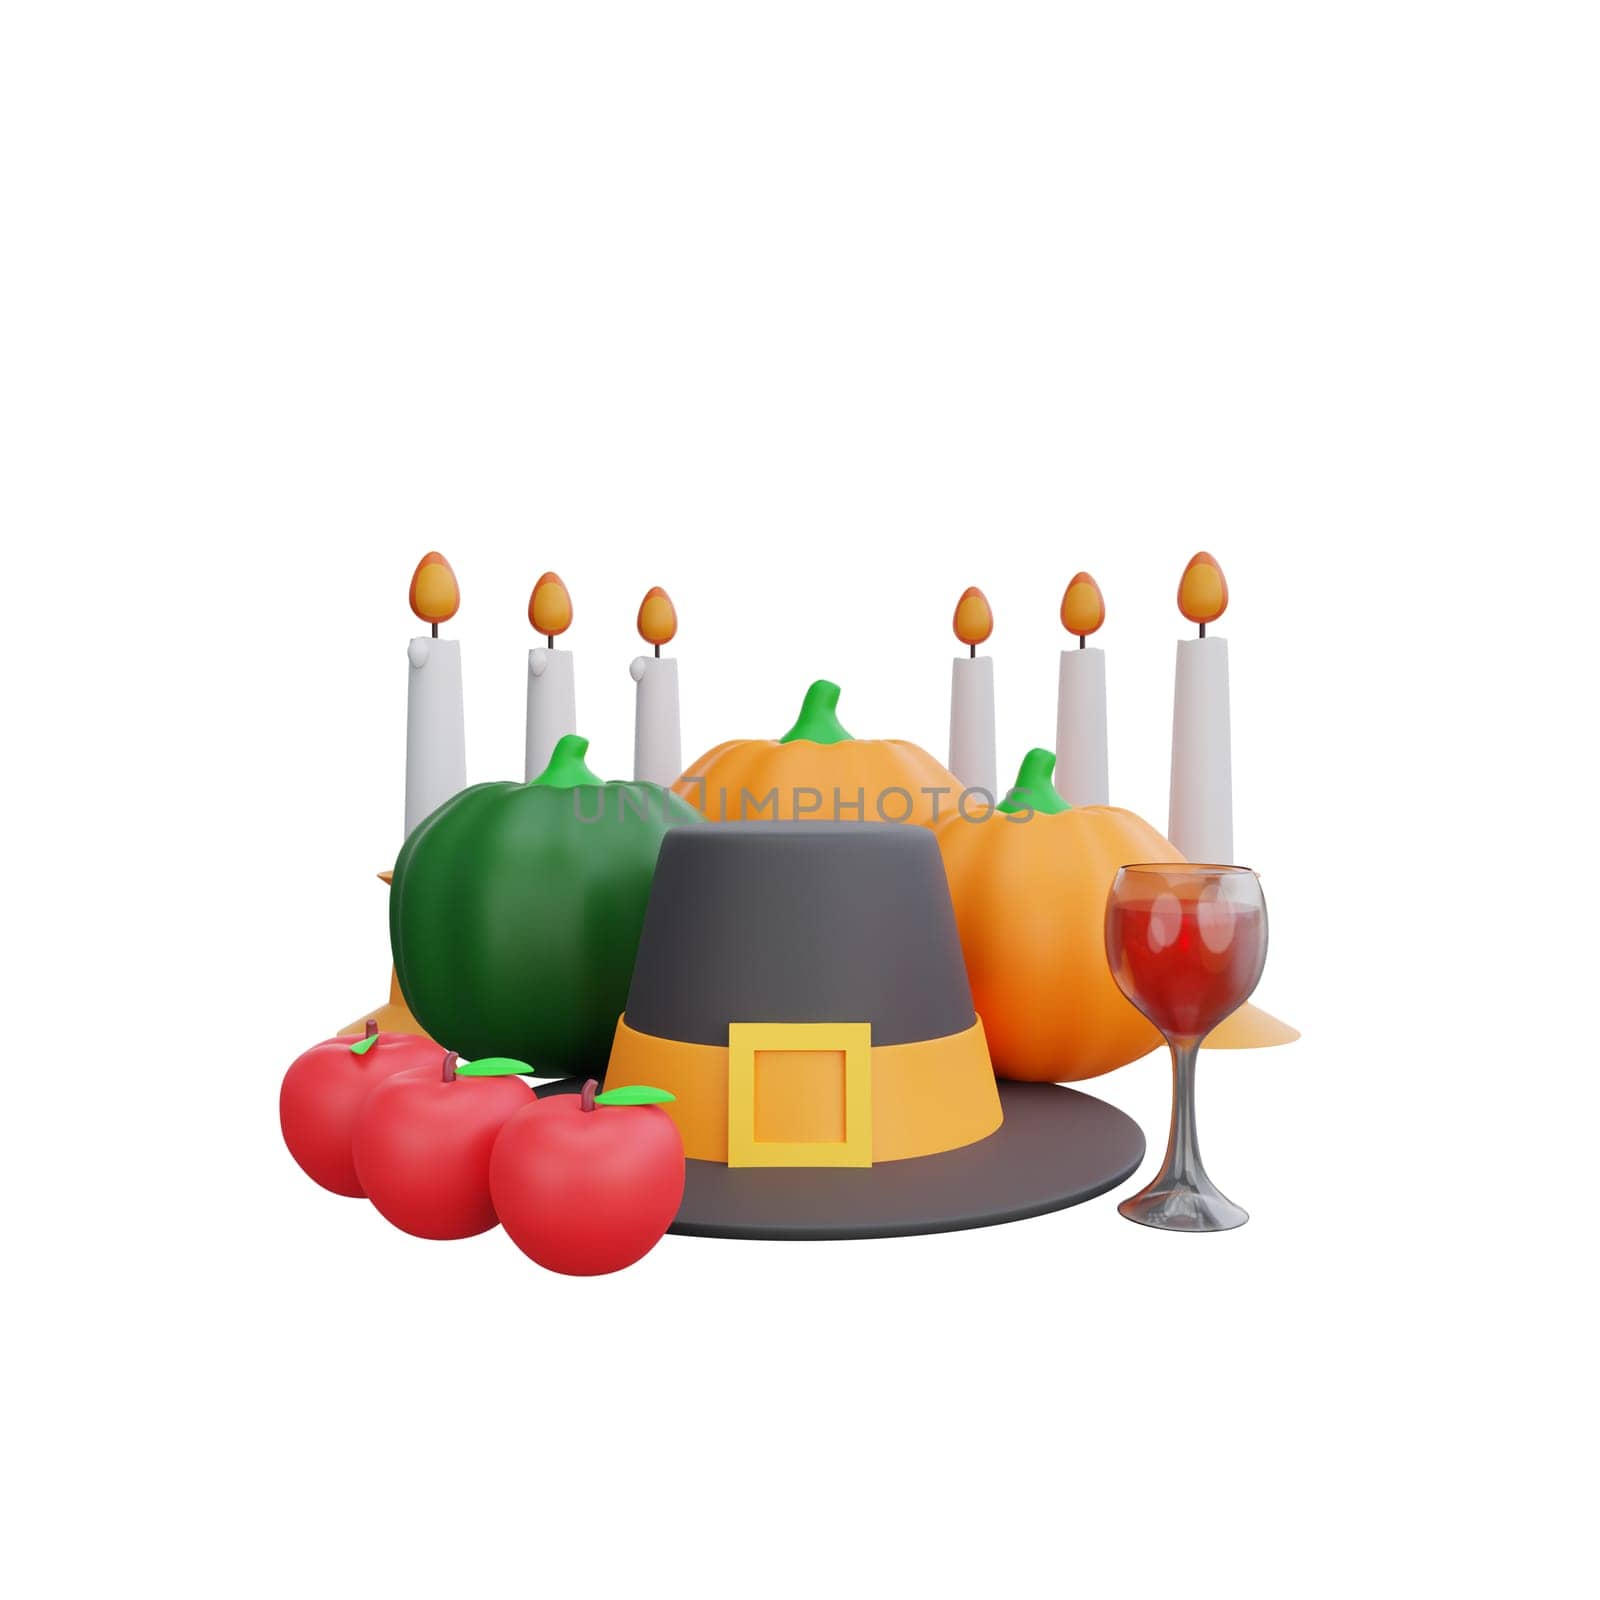 3D rendering of a Thanksgiving centerpiece featuring a pilgrim hat, pumpkins, candles, and apples